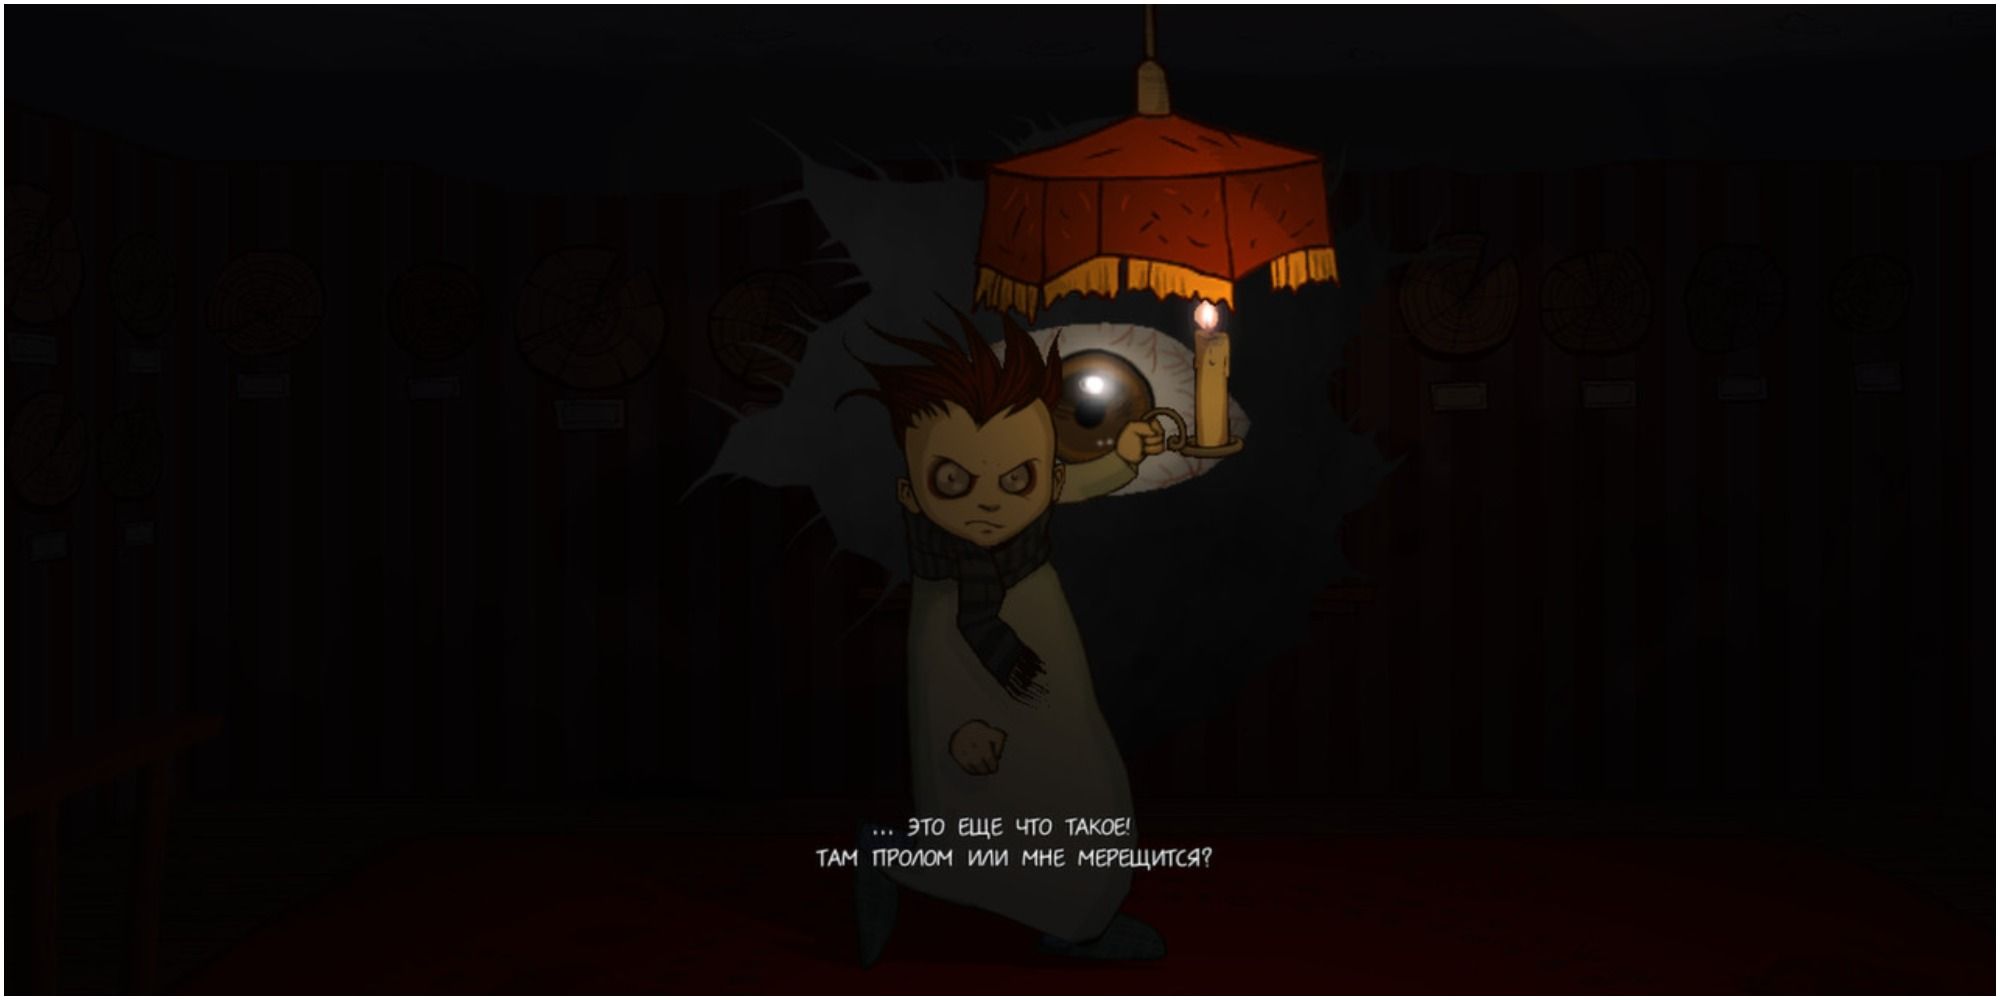 screenshot from knock kncok with the main character holding a candle and a giant eye behind them